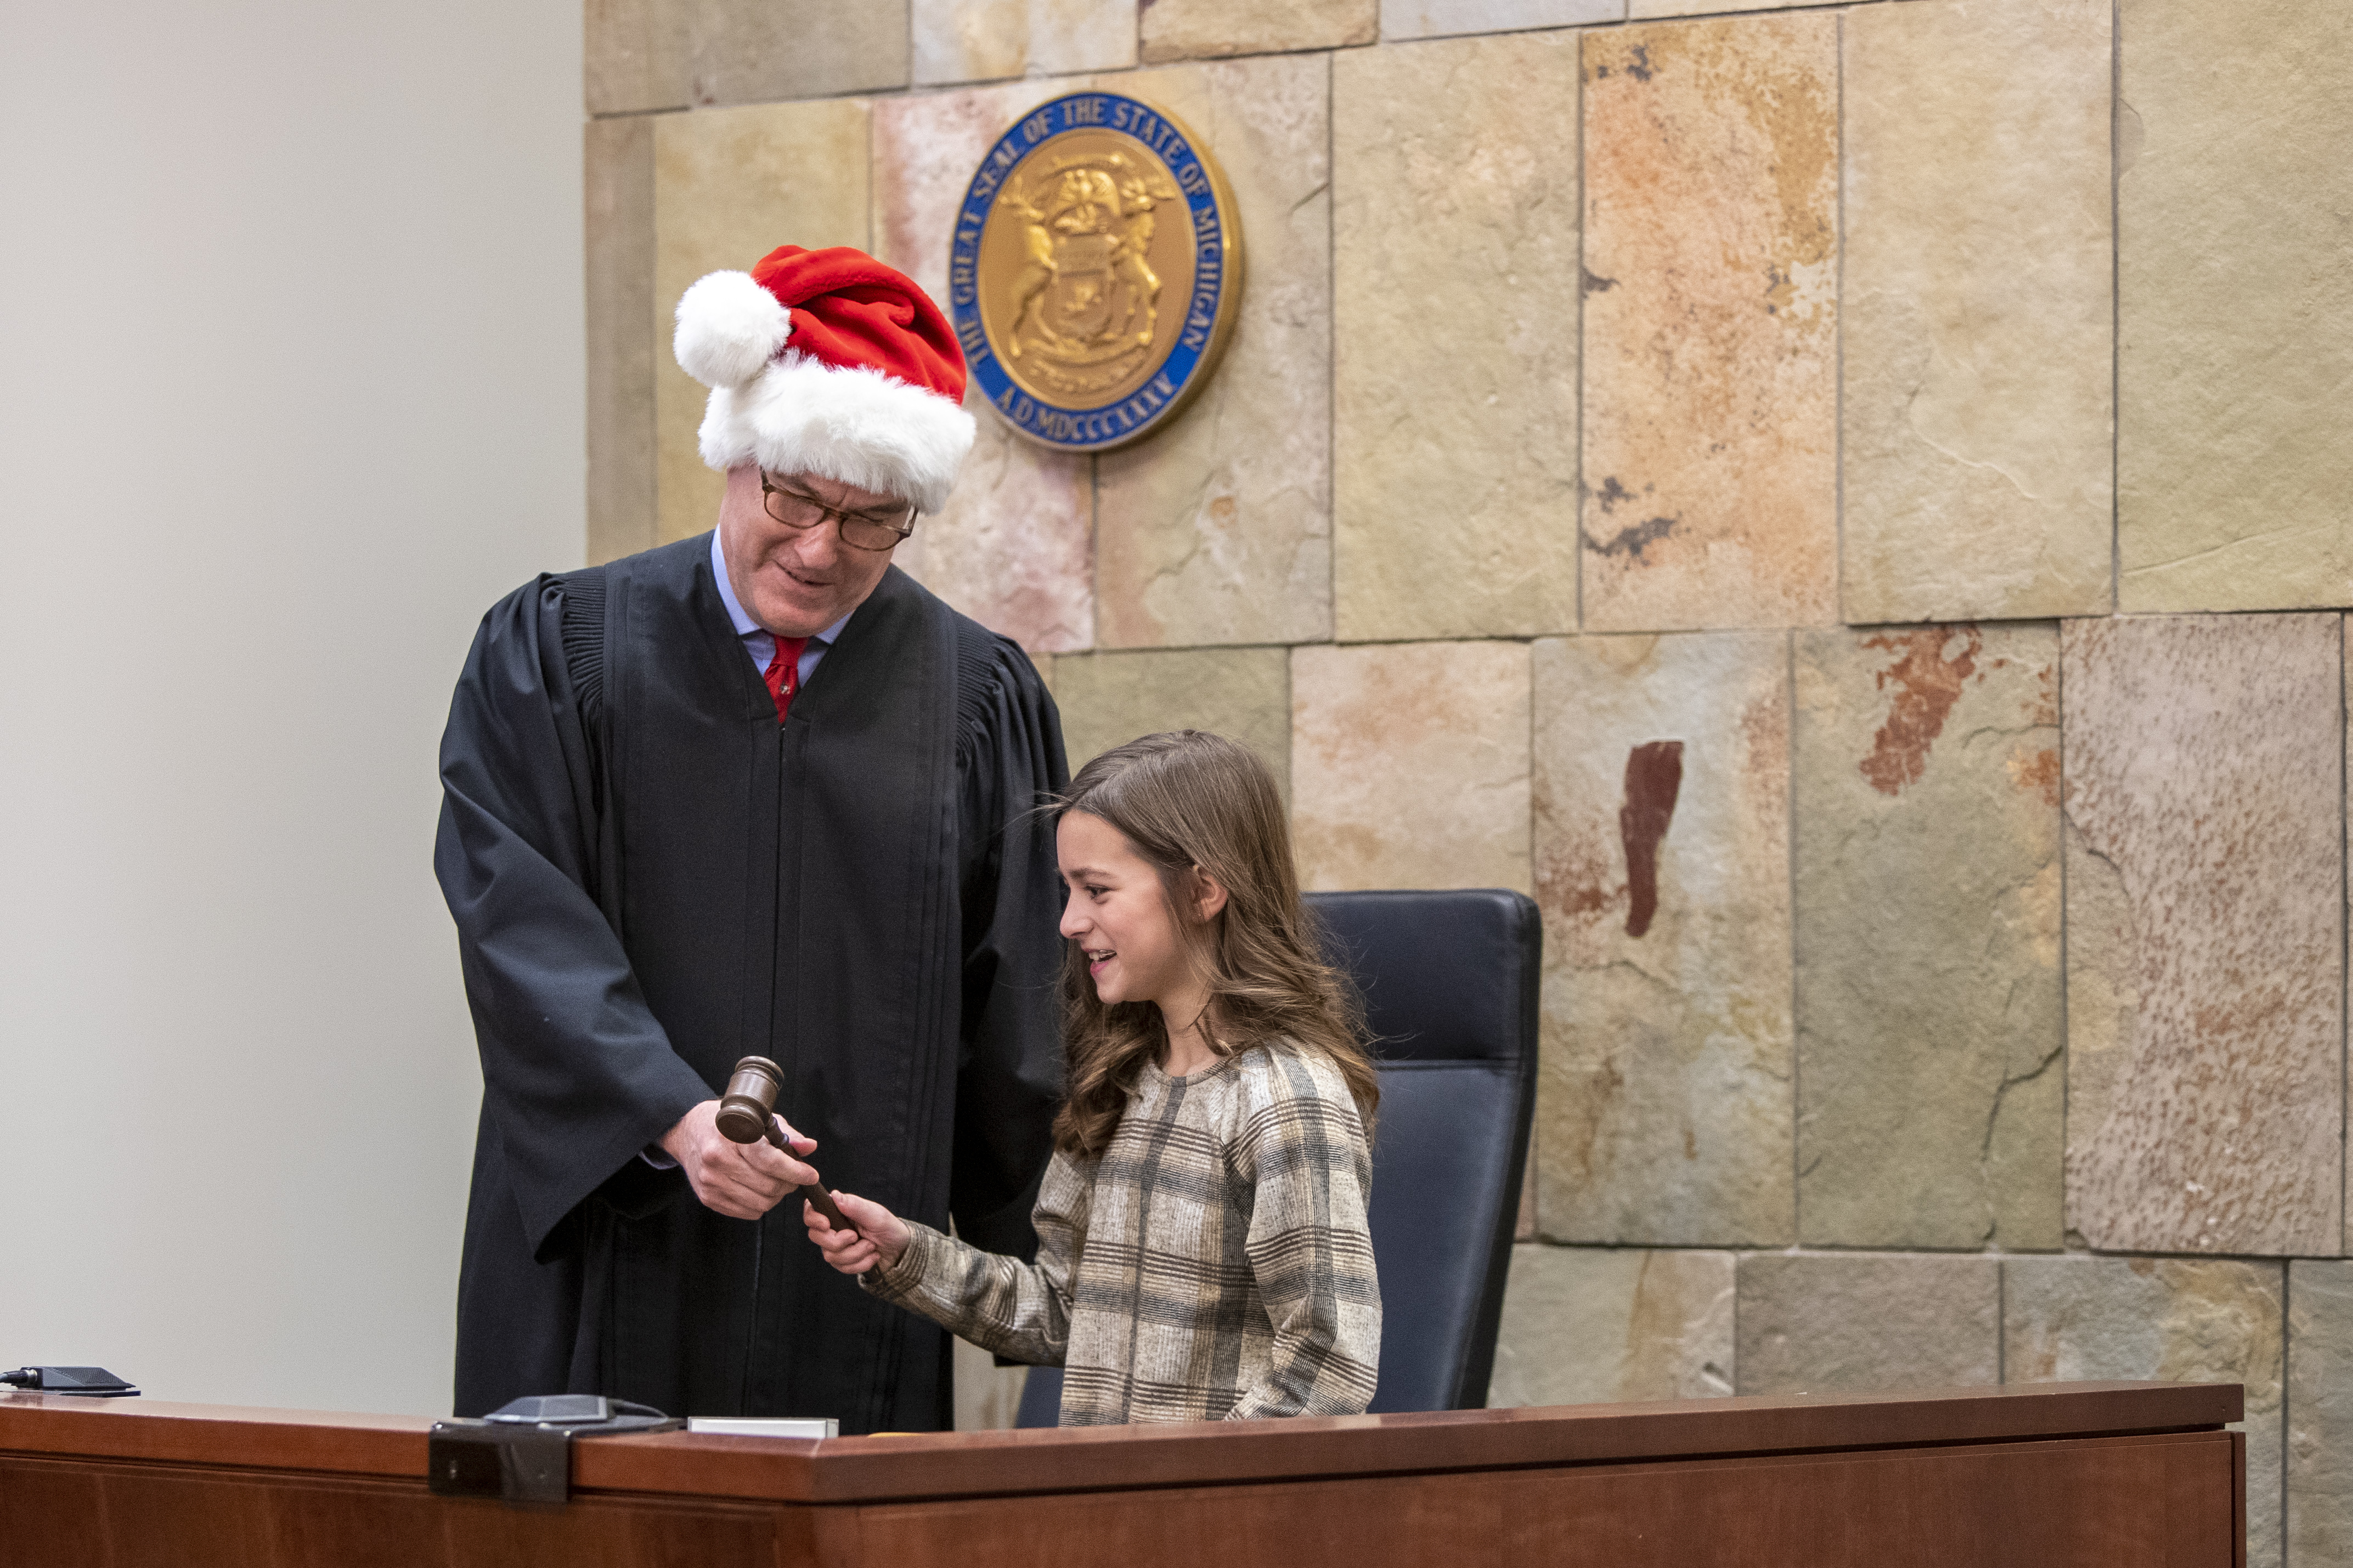 Judge T.J. Ackert lets Corryn Myers, 10, use his gavel  during Adoption Day at the Kent County Courthouse in Grand Rapids on Thursday, Dec. 8, 2022. Corryn’s parents, Tammy and Jordan Myers, are the biological parents of 1-year-old twins Eames and Ellison. Lauren Vermilye, a surrogate, gave birth to the twins after Tammy went through breast cancer treatment and has no claim to the babies. The Myers family was able to adopt the twins after convincing the court system to grant them custody. (Cory Morse | MLive.com)